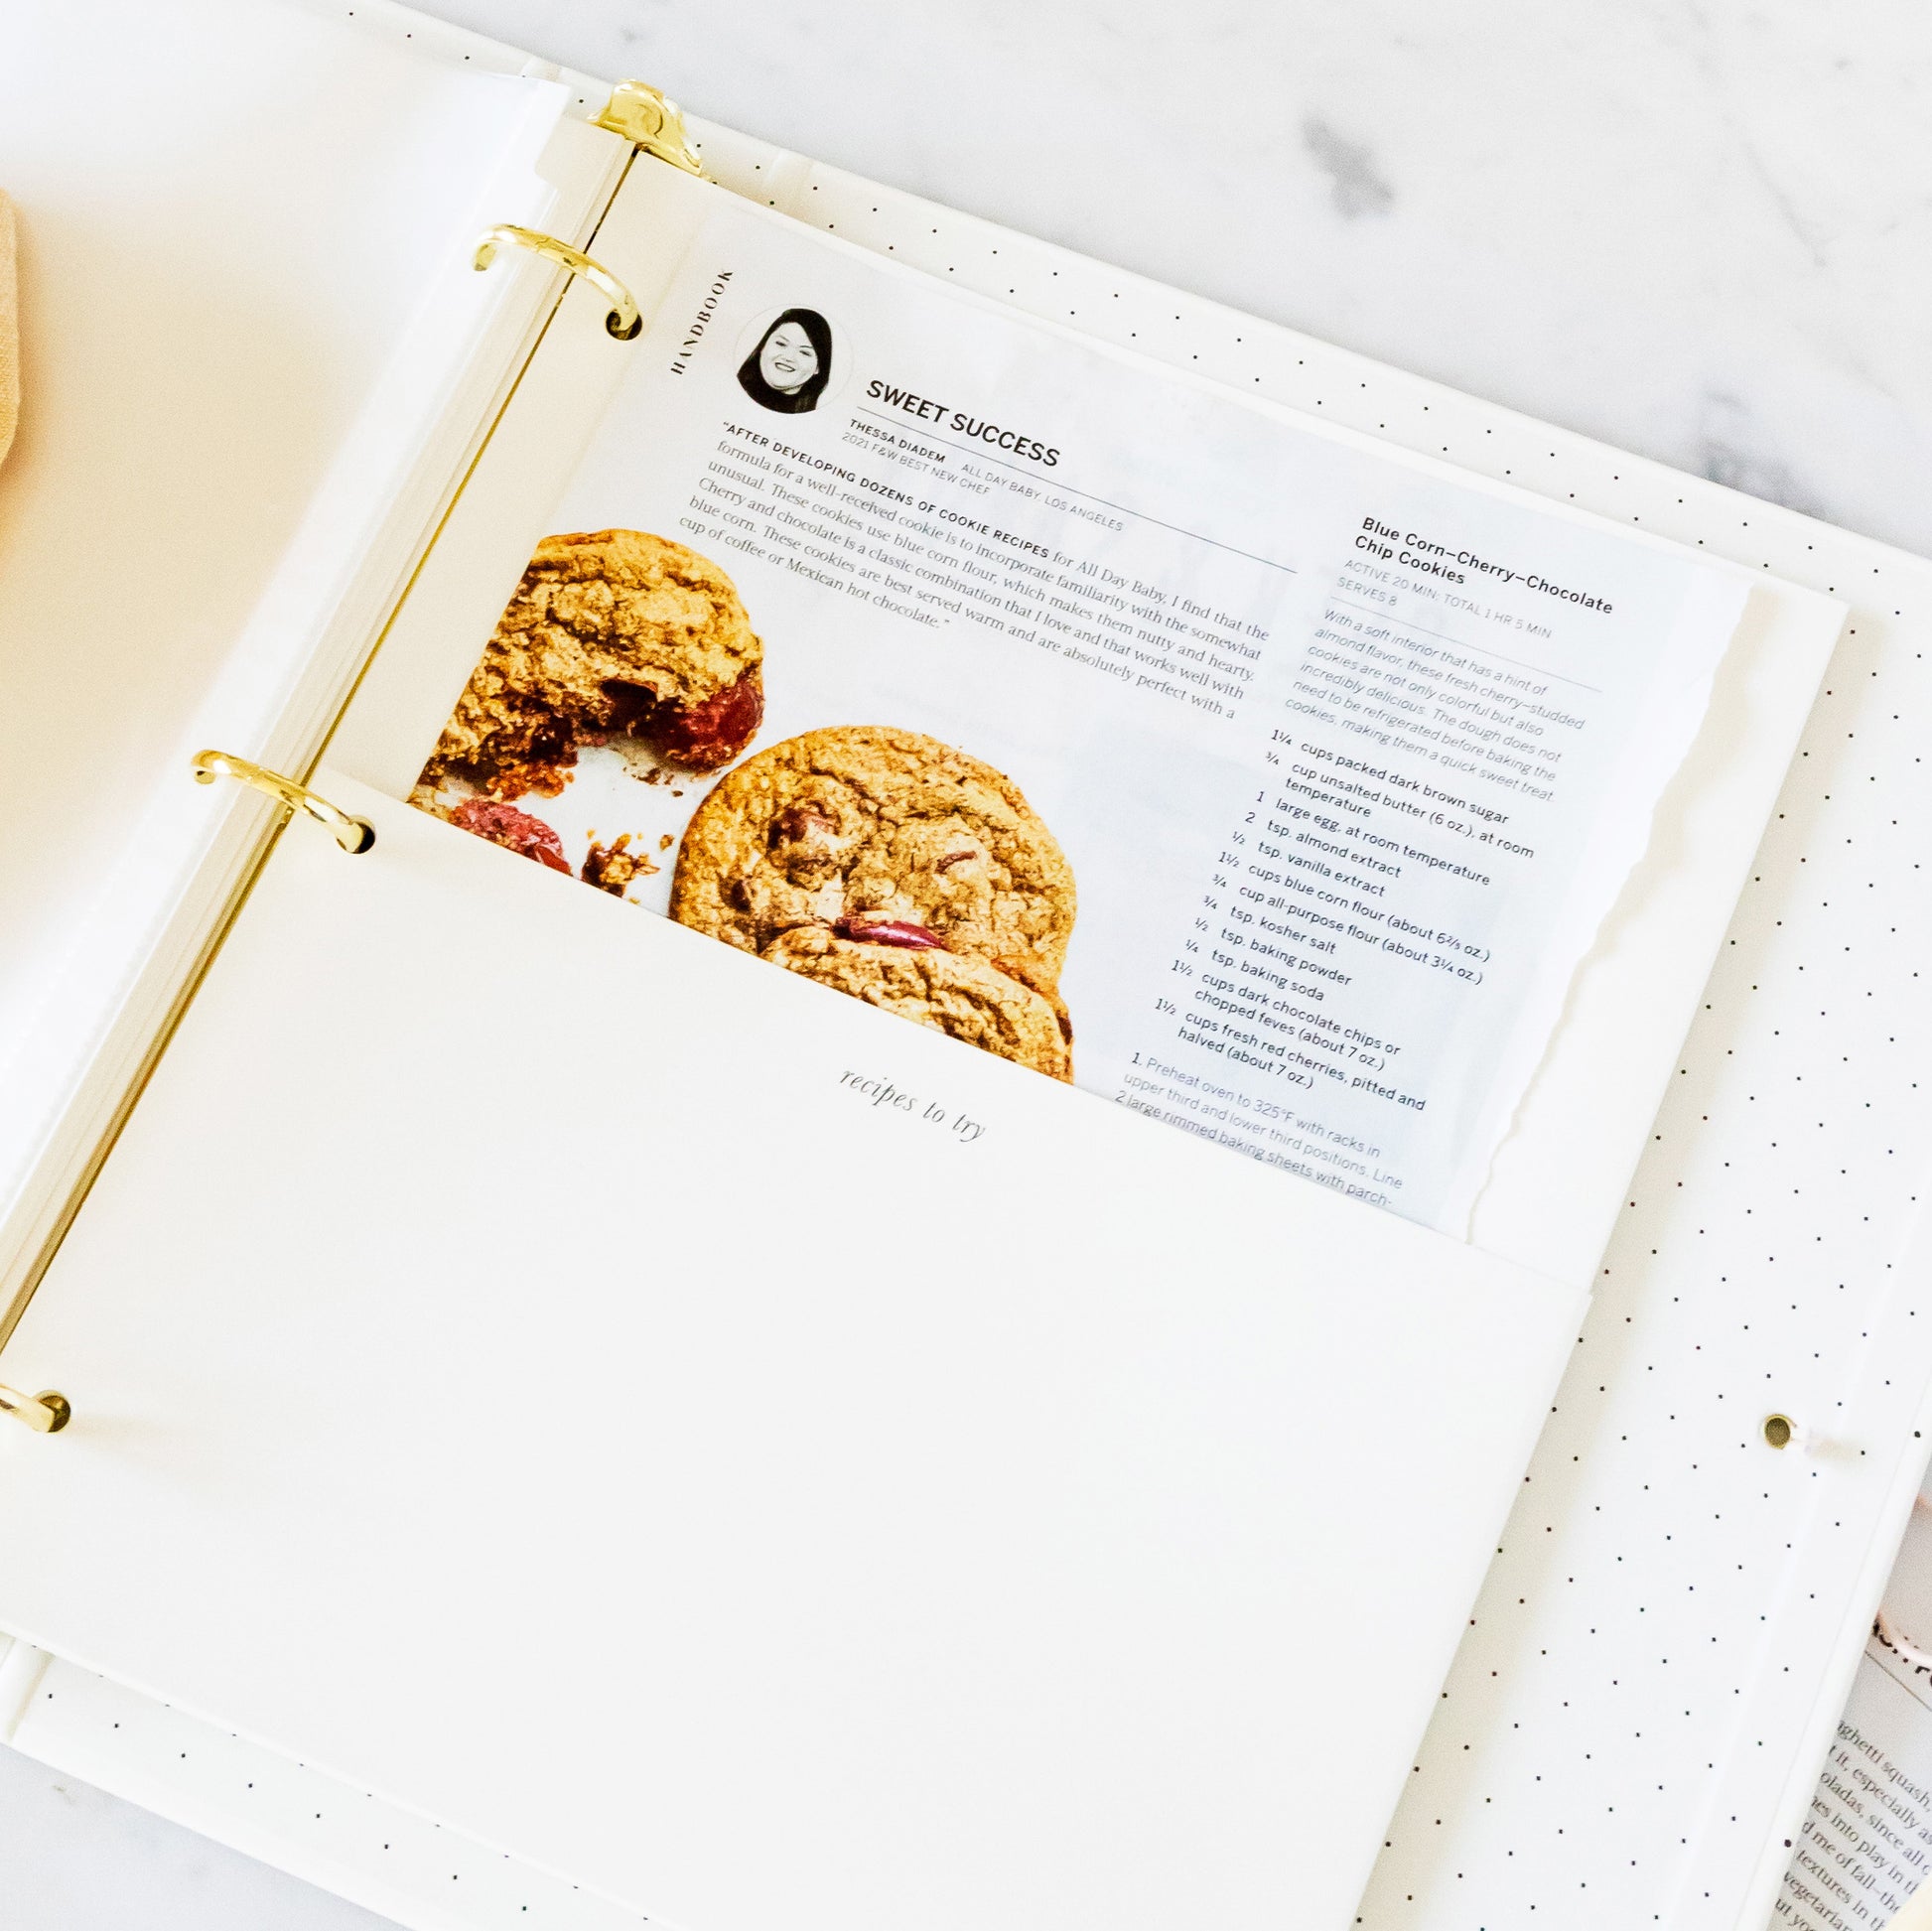 Sugar Paper Cream & Black Swiss Dot Recipe Book with Page Dividers and Guided Pages to Record and Organize Your Favorite Recipes